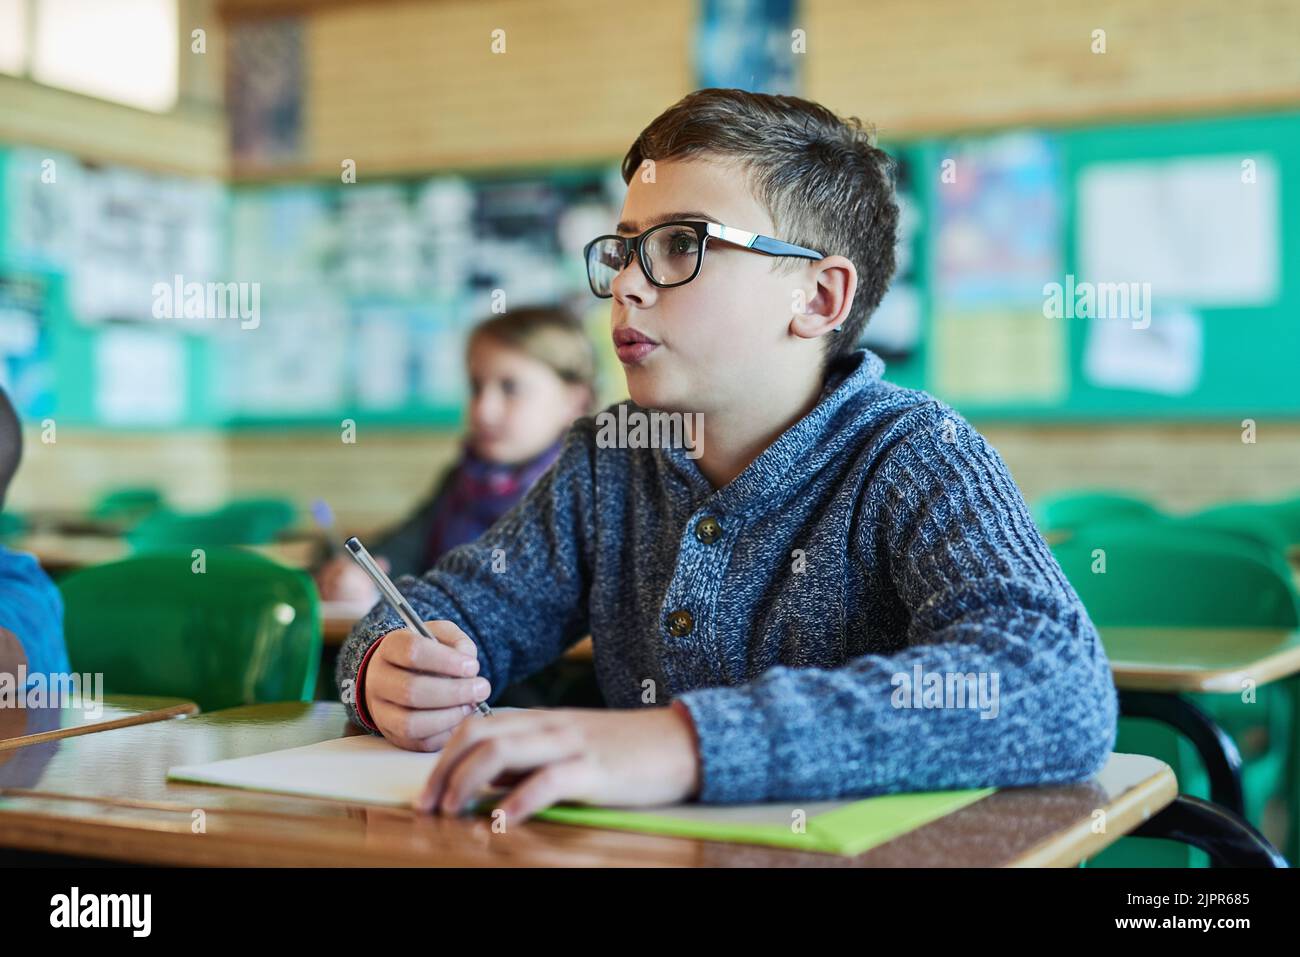 Education is the most powerful in shaping young minds. an elementary school boy working in class. Stock Photo